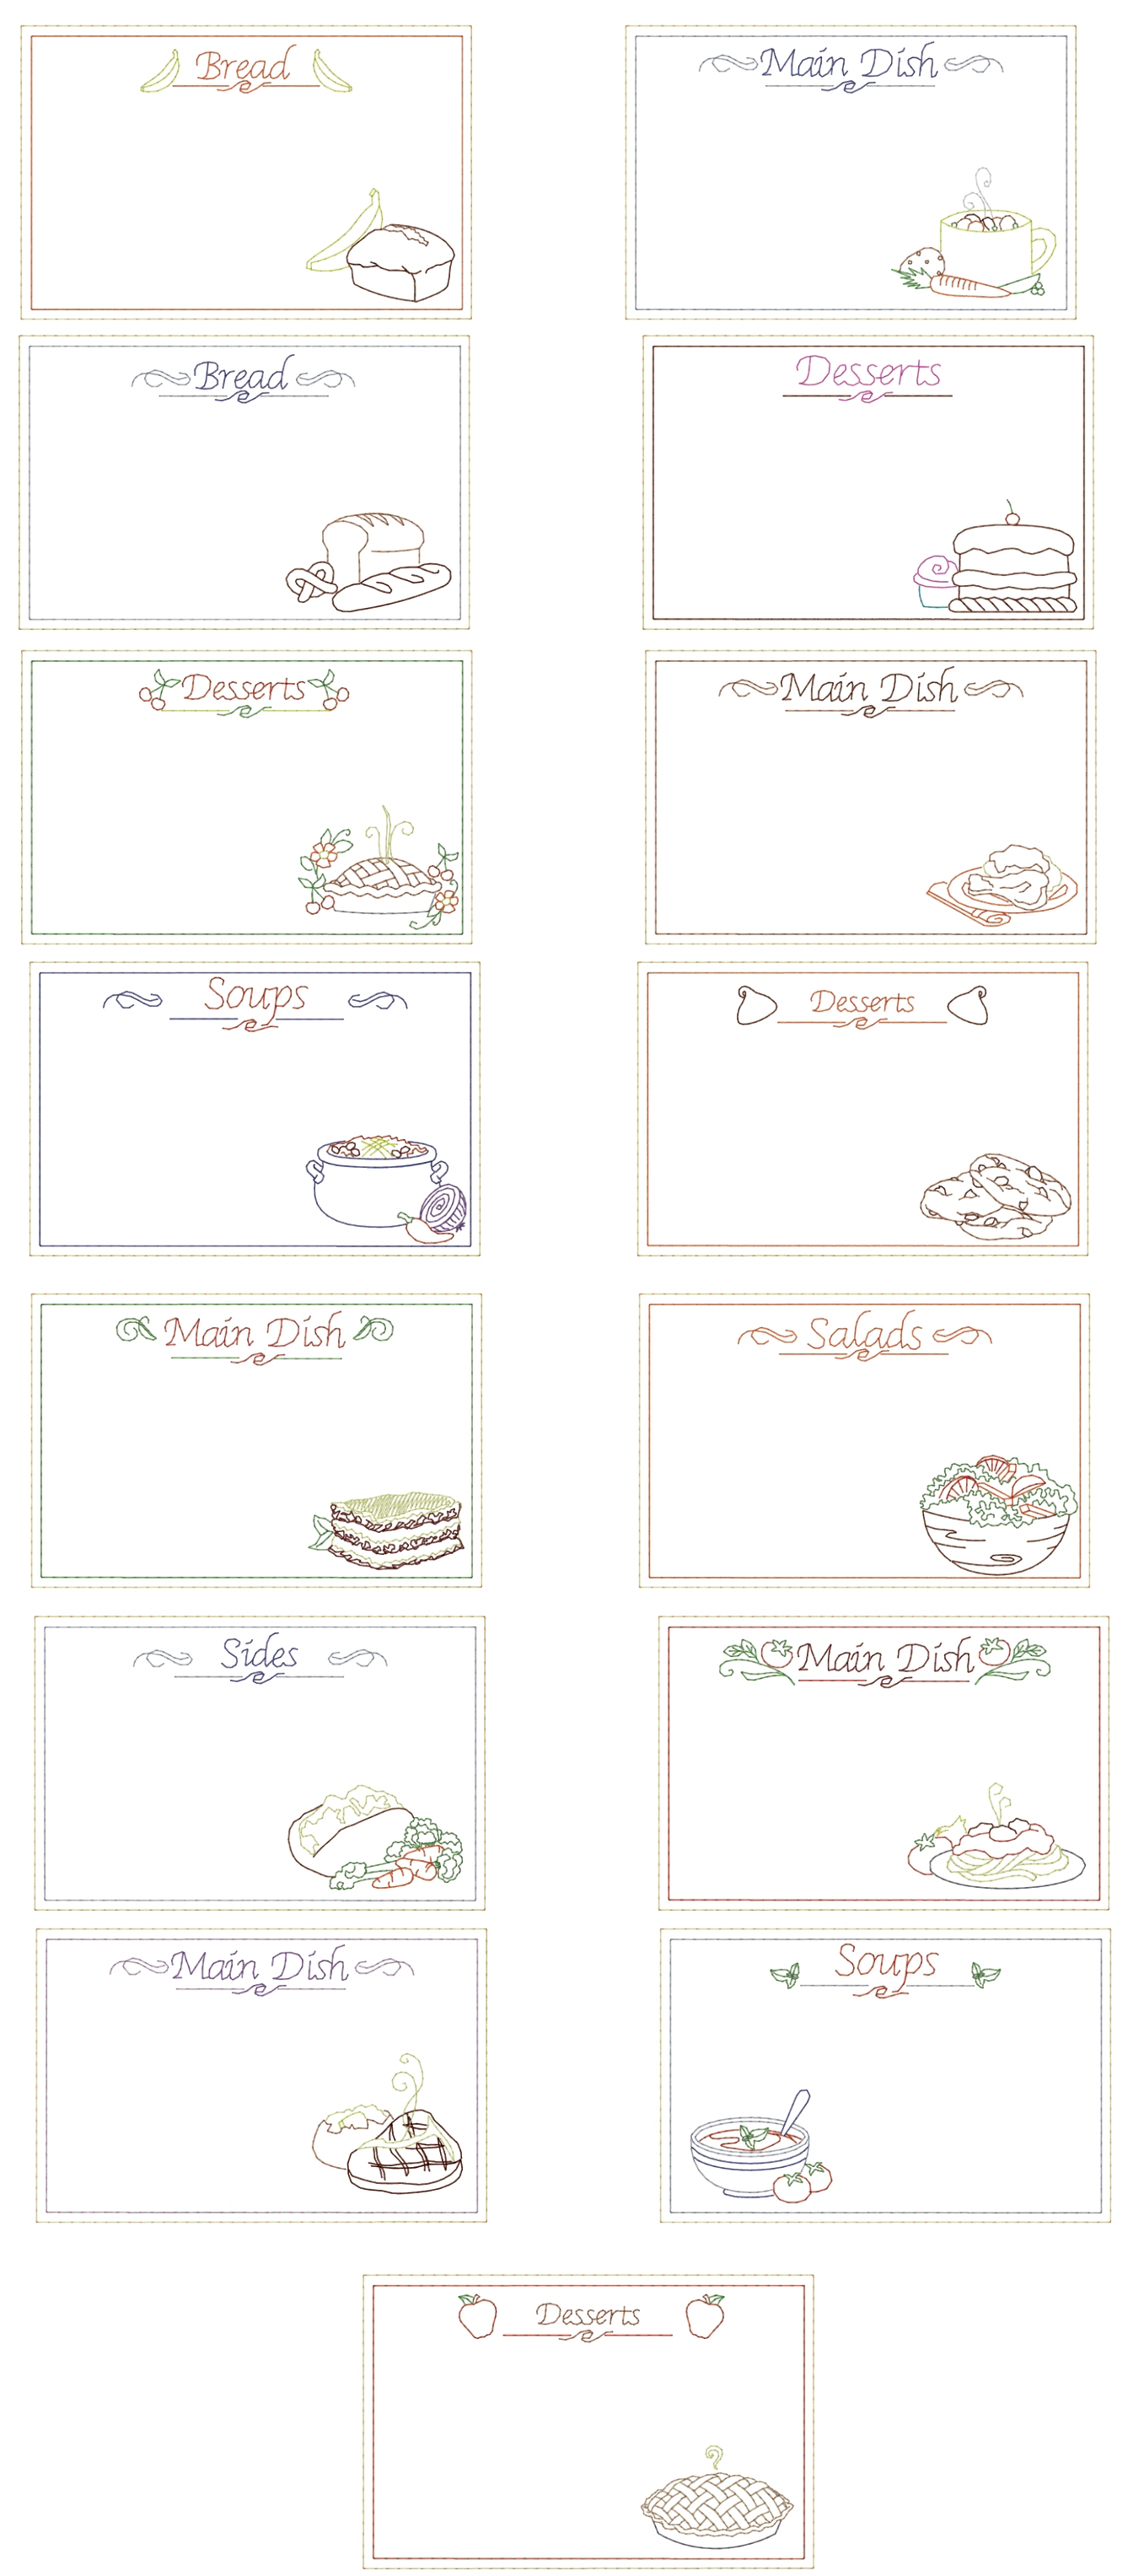 Recipe Cards Embroidery Designs by Dakota Collectibles on Multi-Format CD-ROM F70513